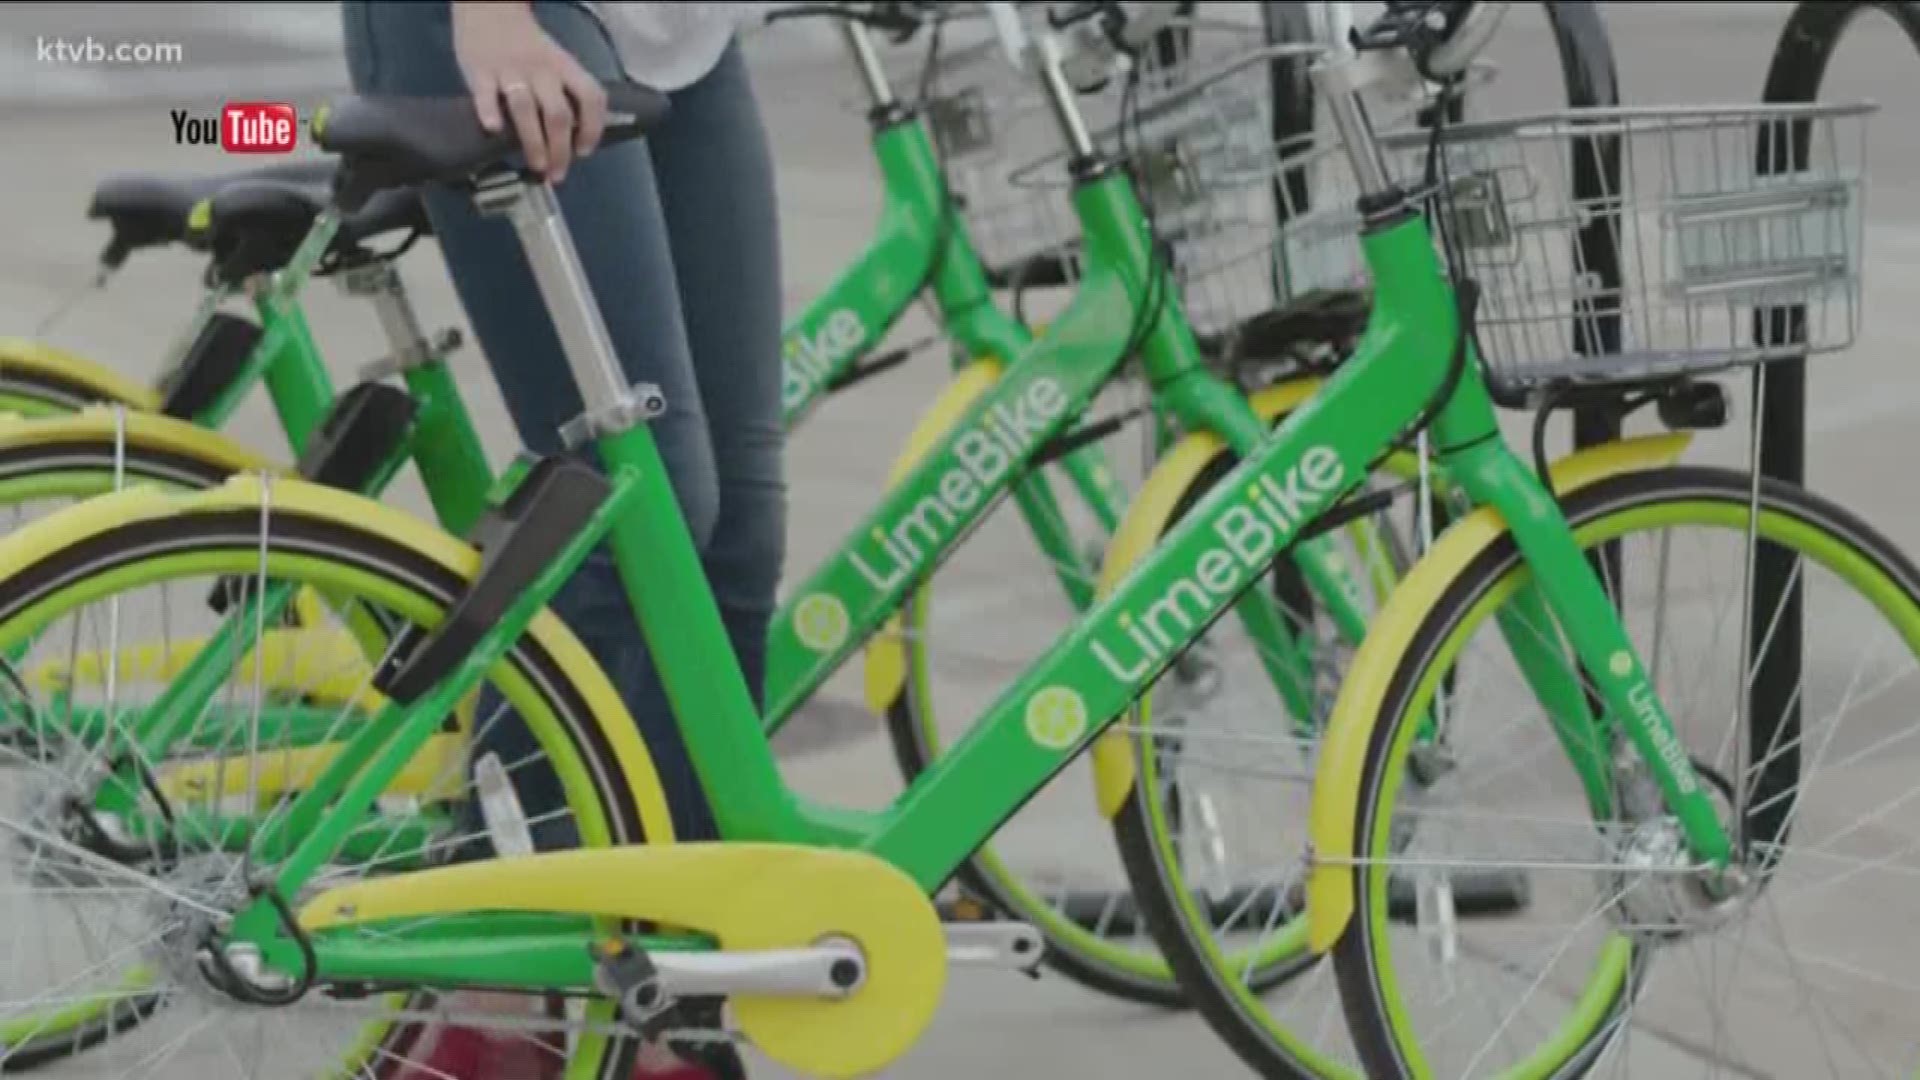 Not everyone is happy about Lime Bike coming to town.